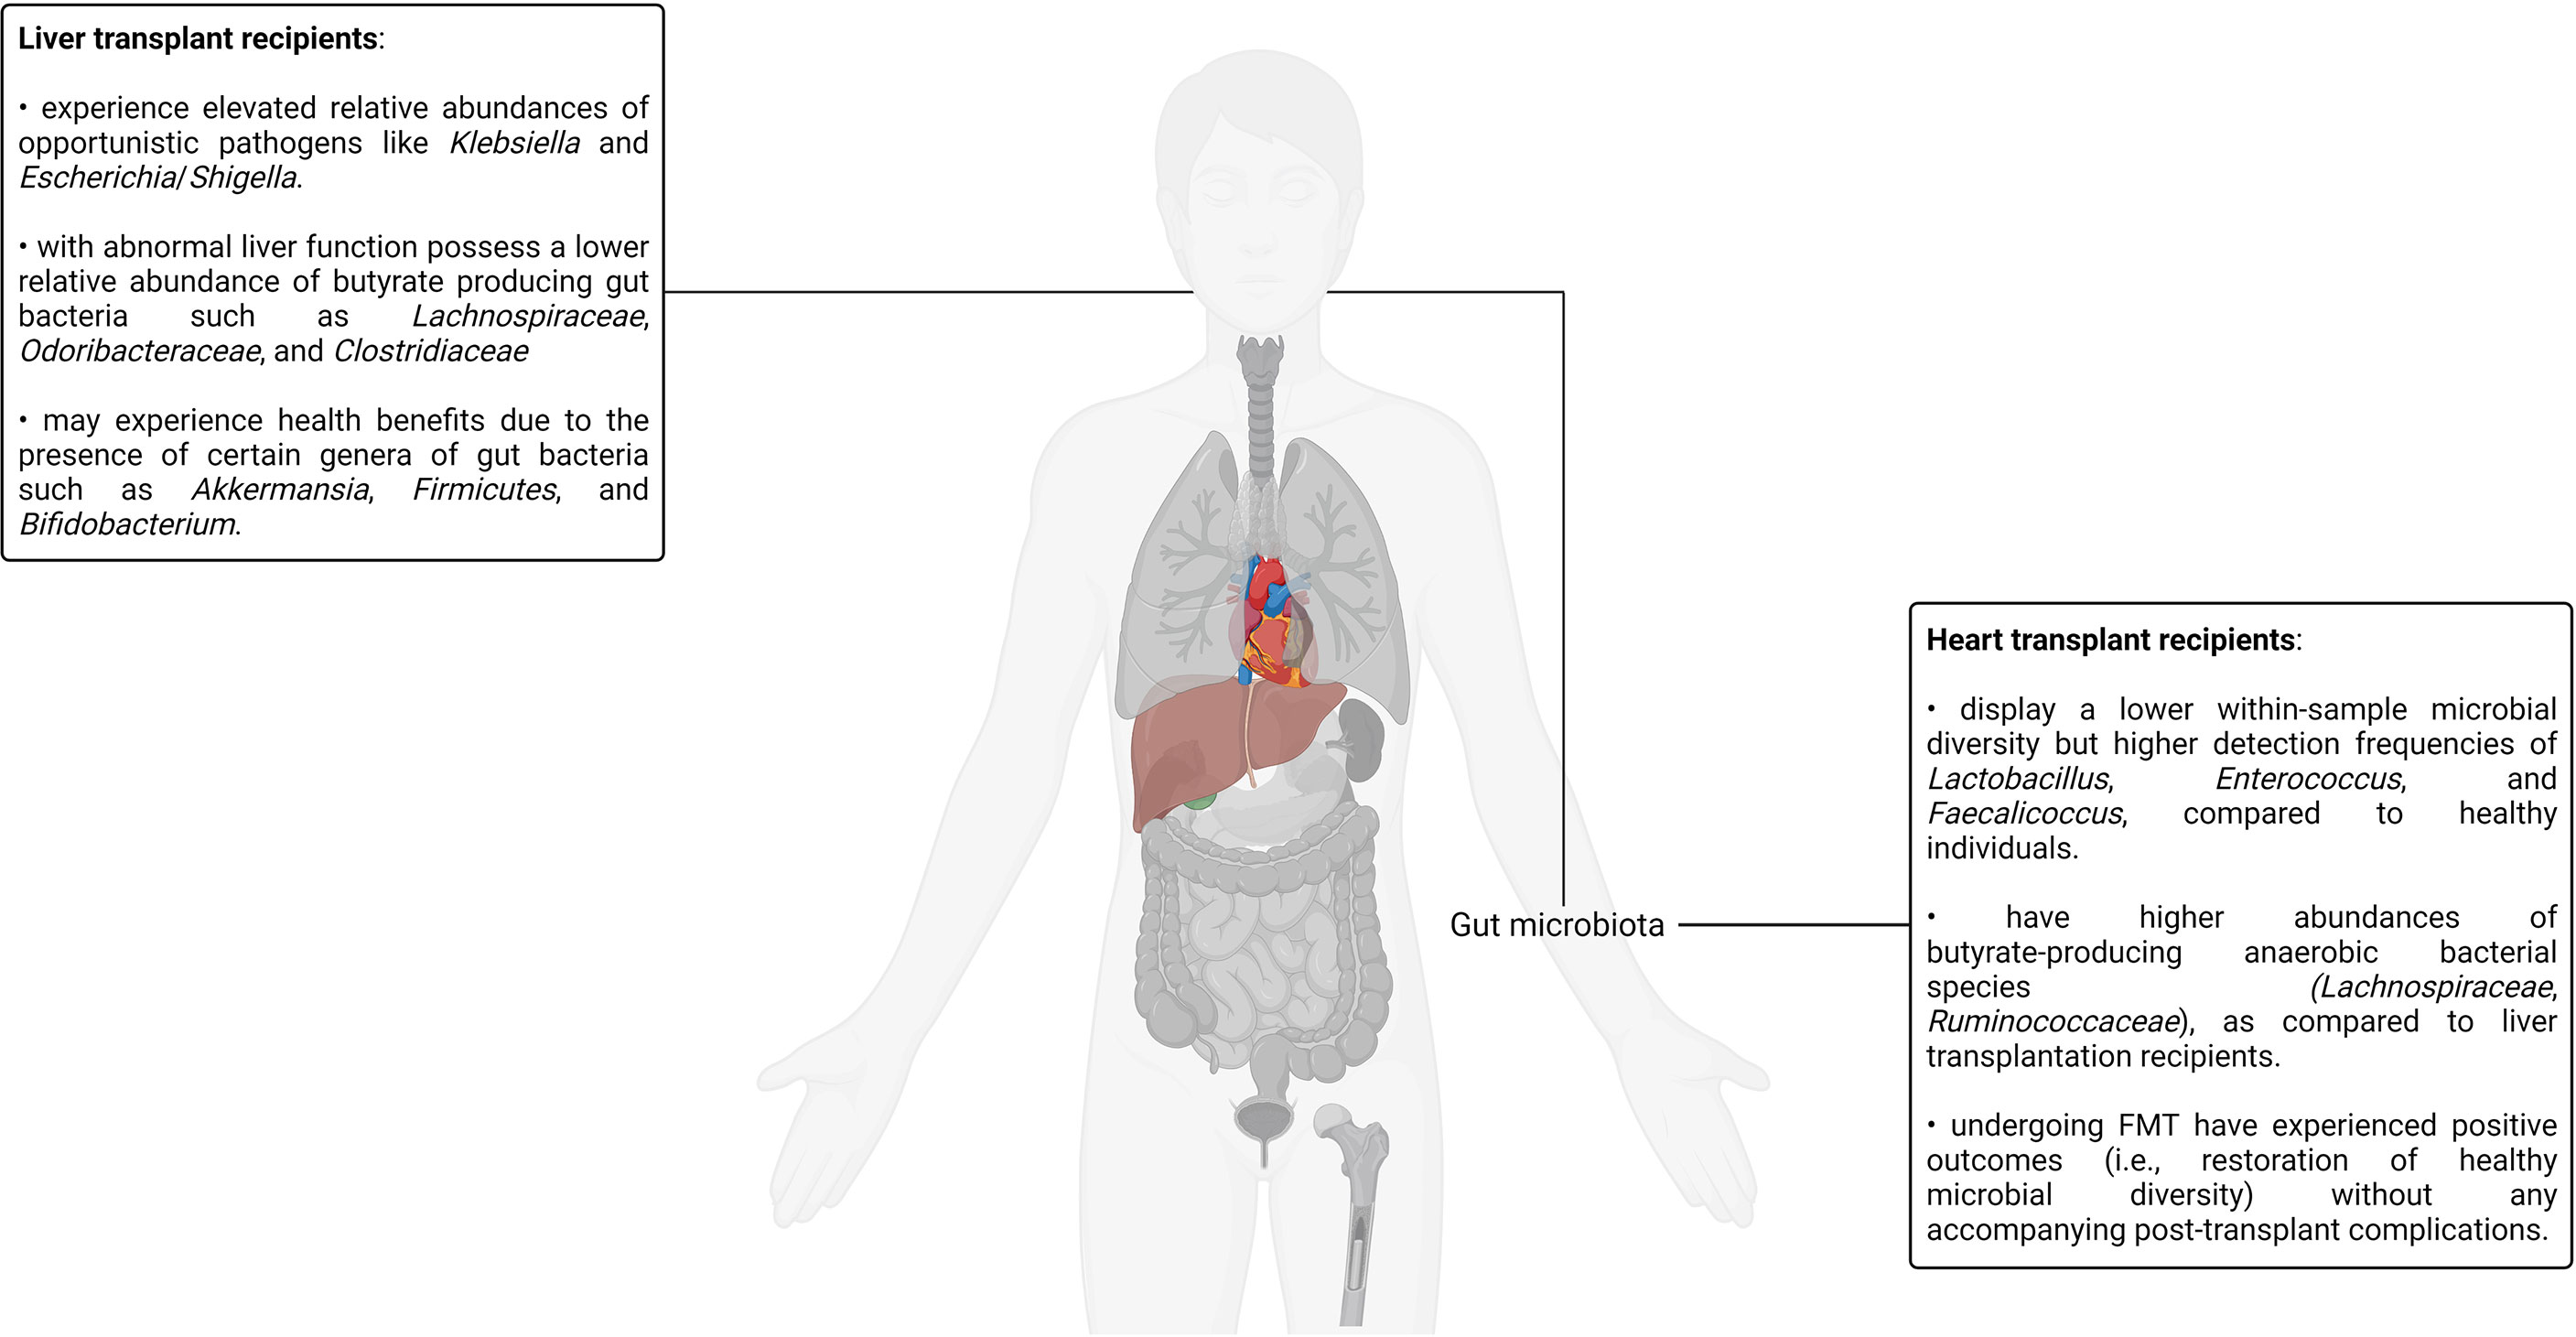 Frontiers The Impact of Human Microbiotas in Hematopoietic Stem Cell and Organ Transplantation